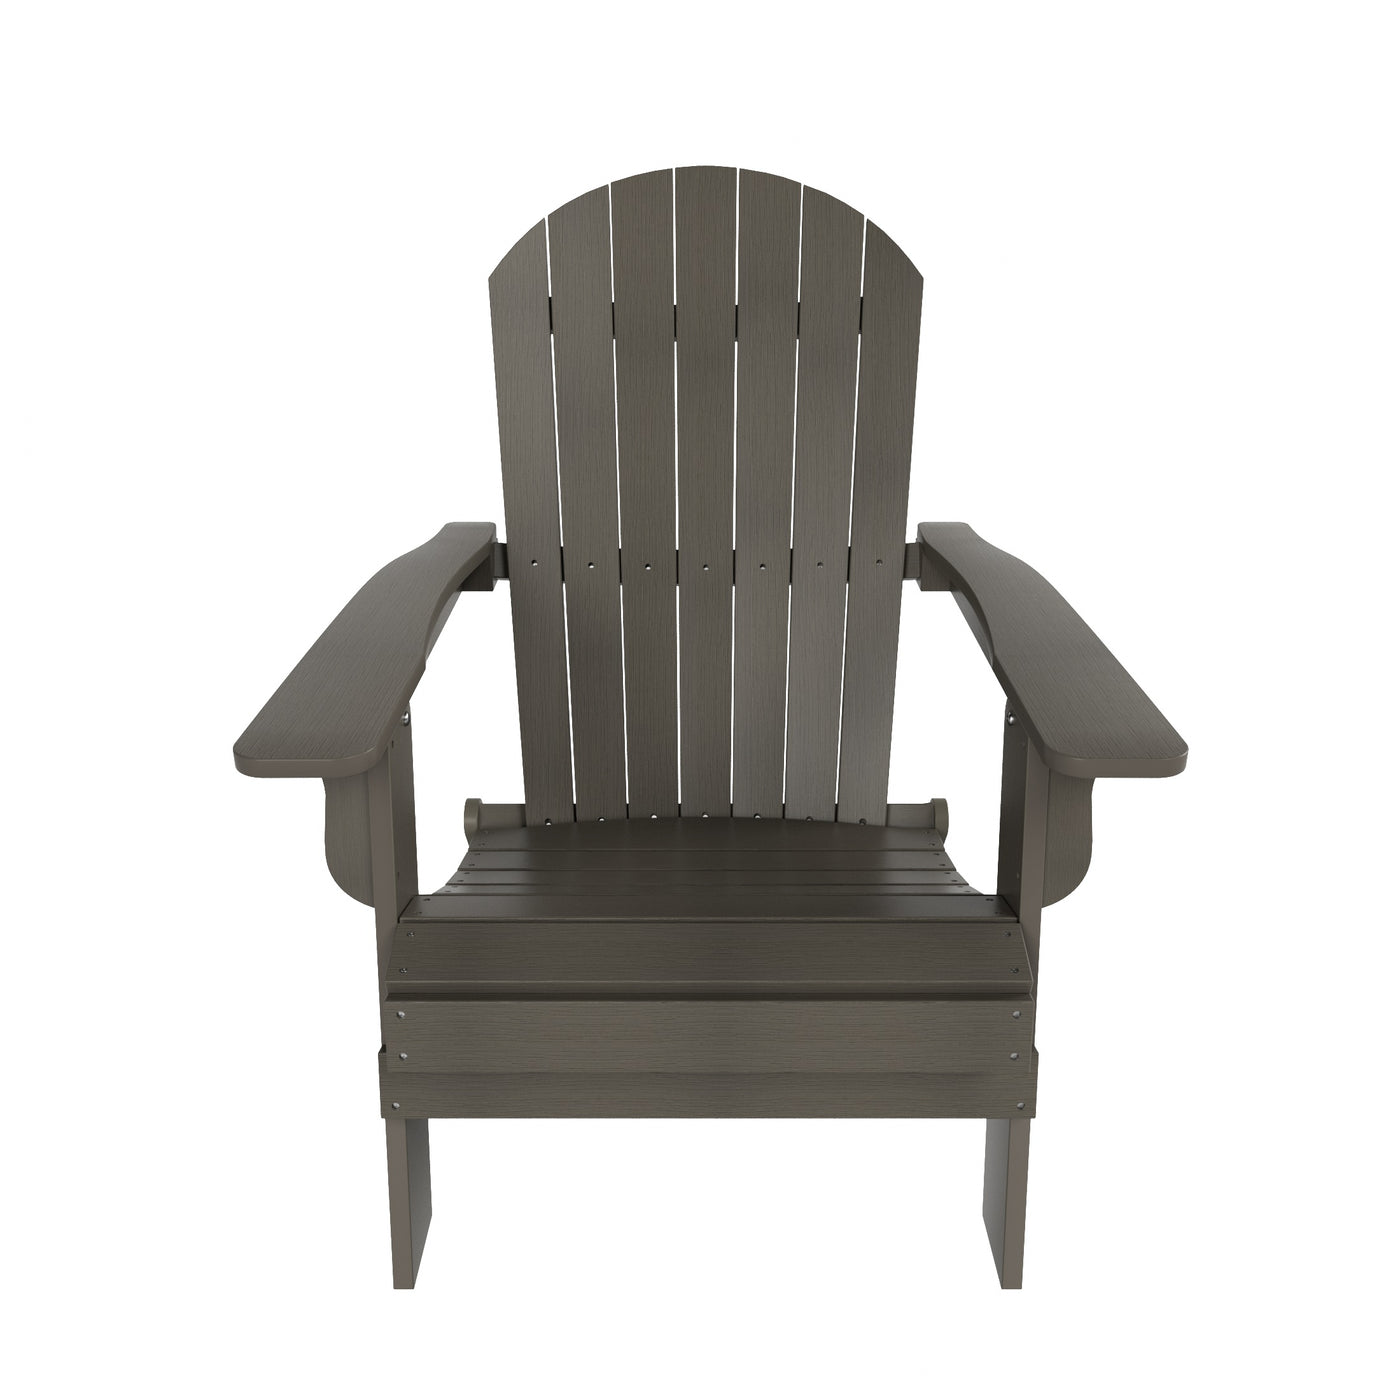 Tuscany HIPS 2-Piece Outdoor Folding Adirondack Chair With Side Table Set